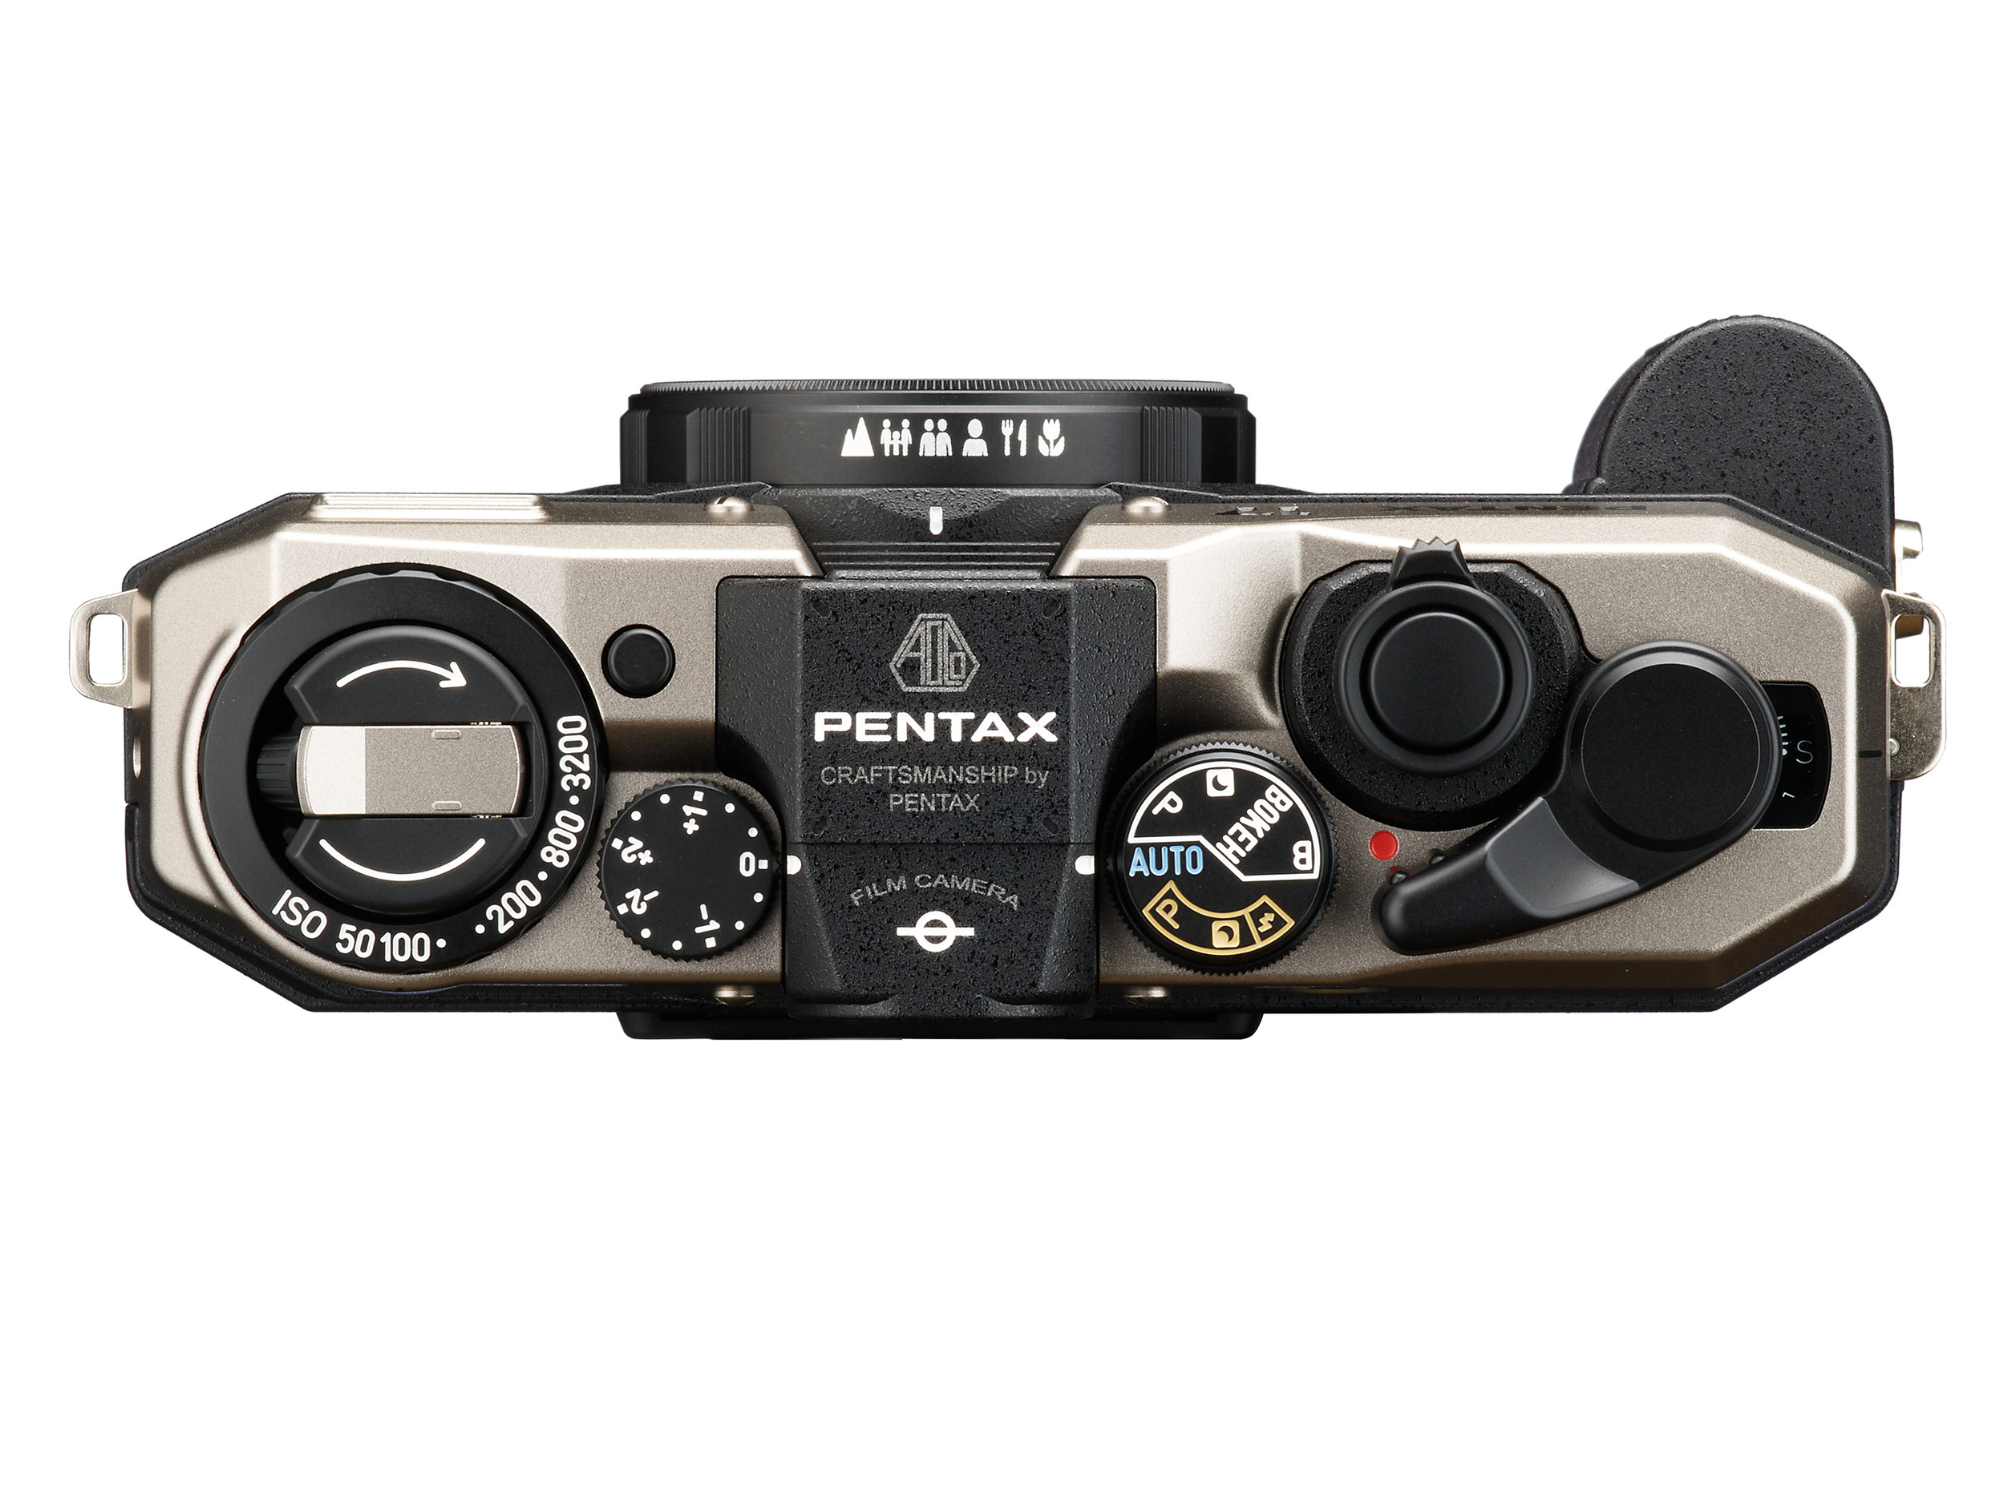 Pentax 17 Film Camera - Product Photo - view from the top